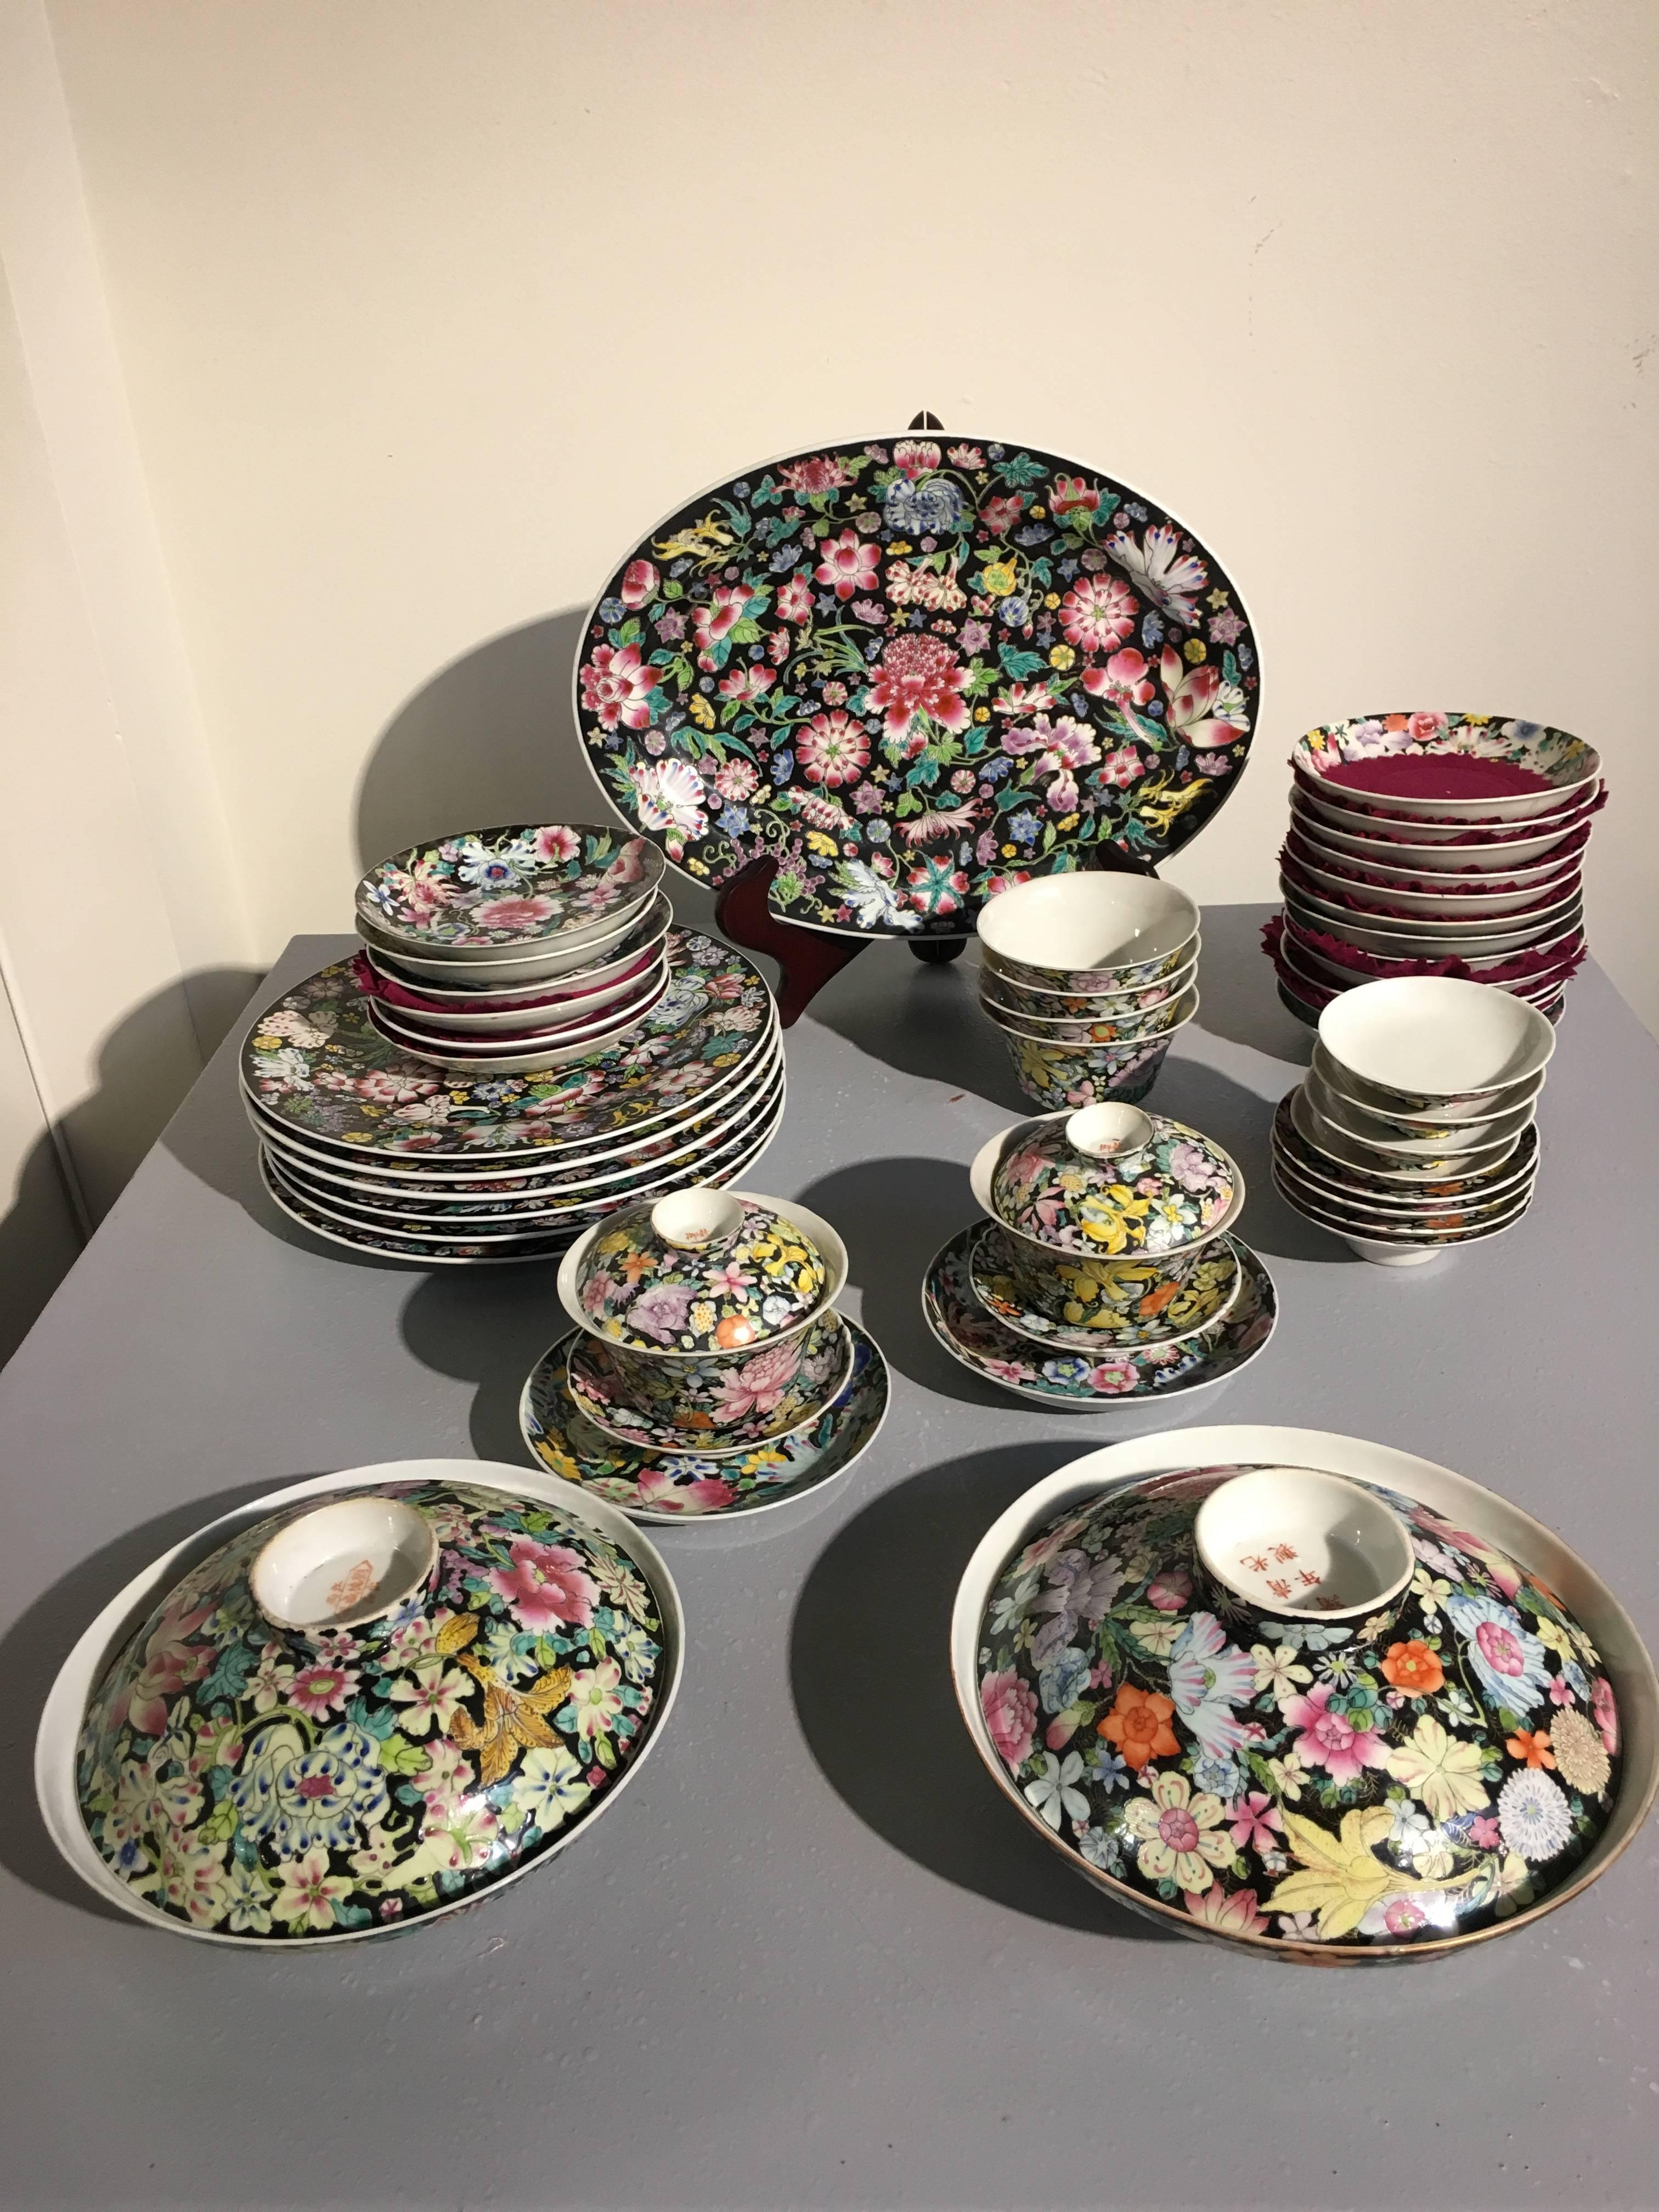 A large assembled set of Chinese porcelain mille fleur wares. The set featuring a full tea service, as well as various plates, cups, and saucers. All piece in the mille fleur, or thousand flowers, pattern, on a black ground. All pieces marked with